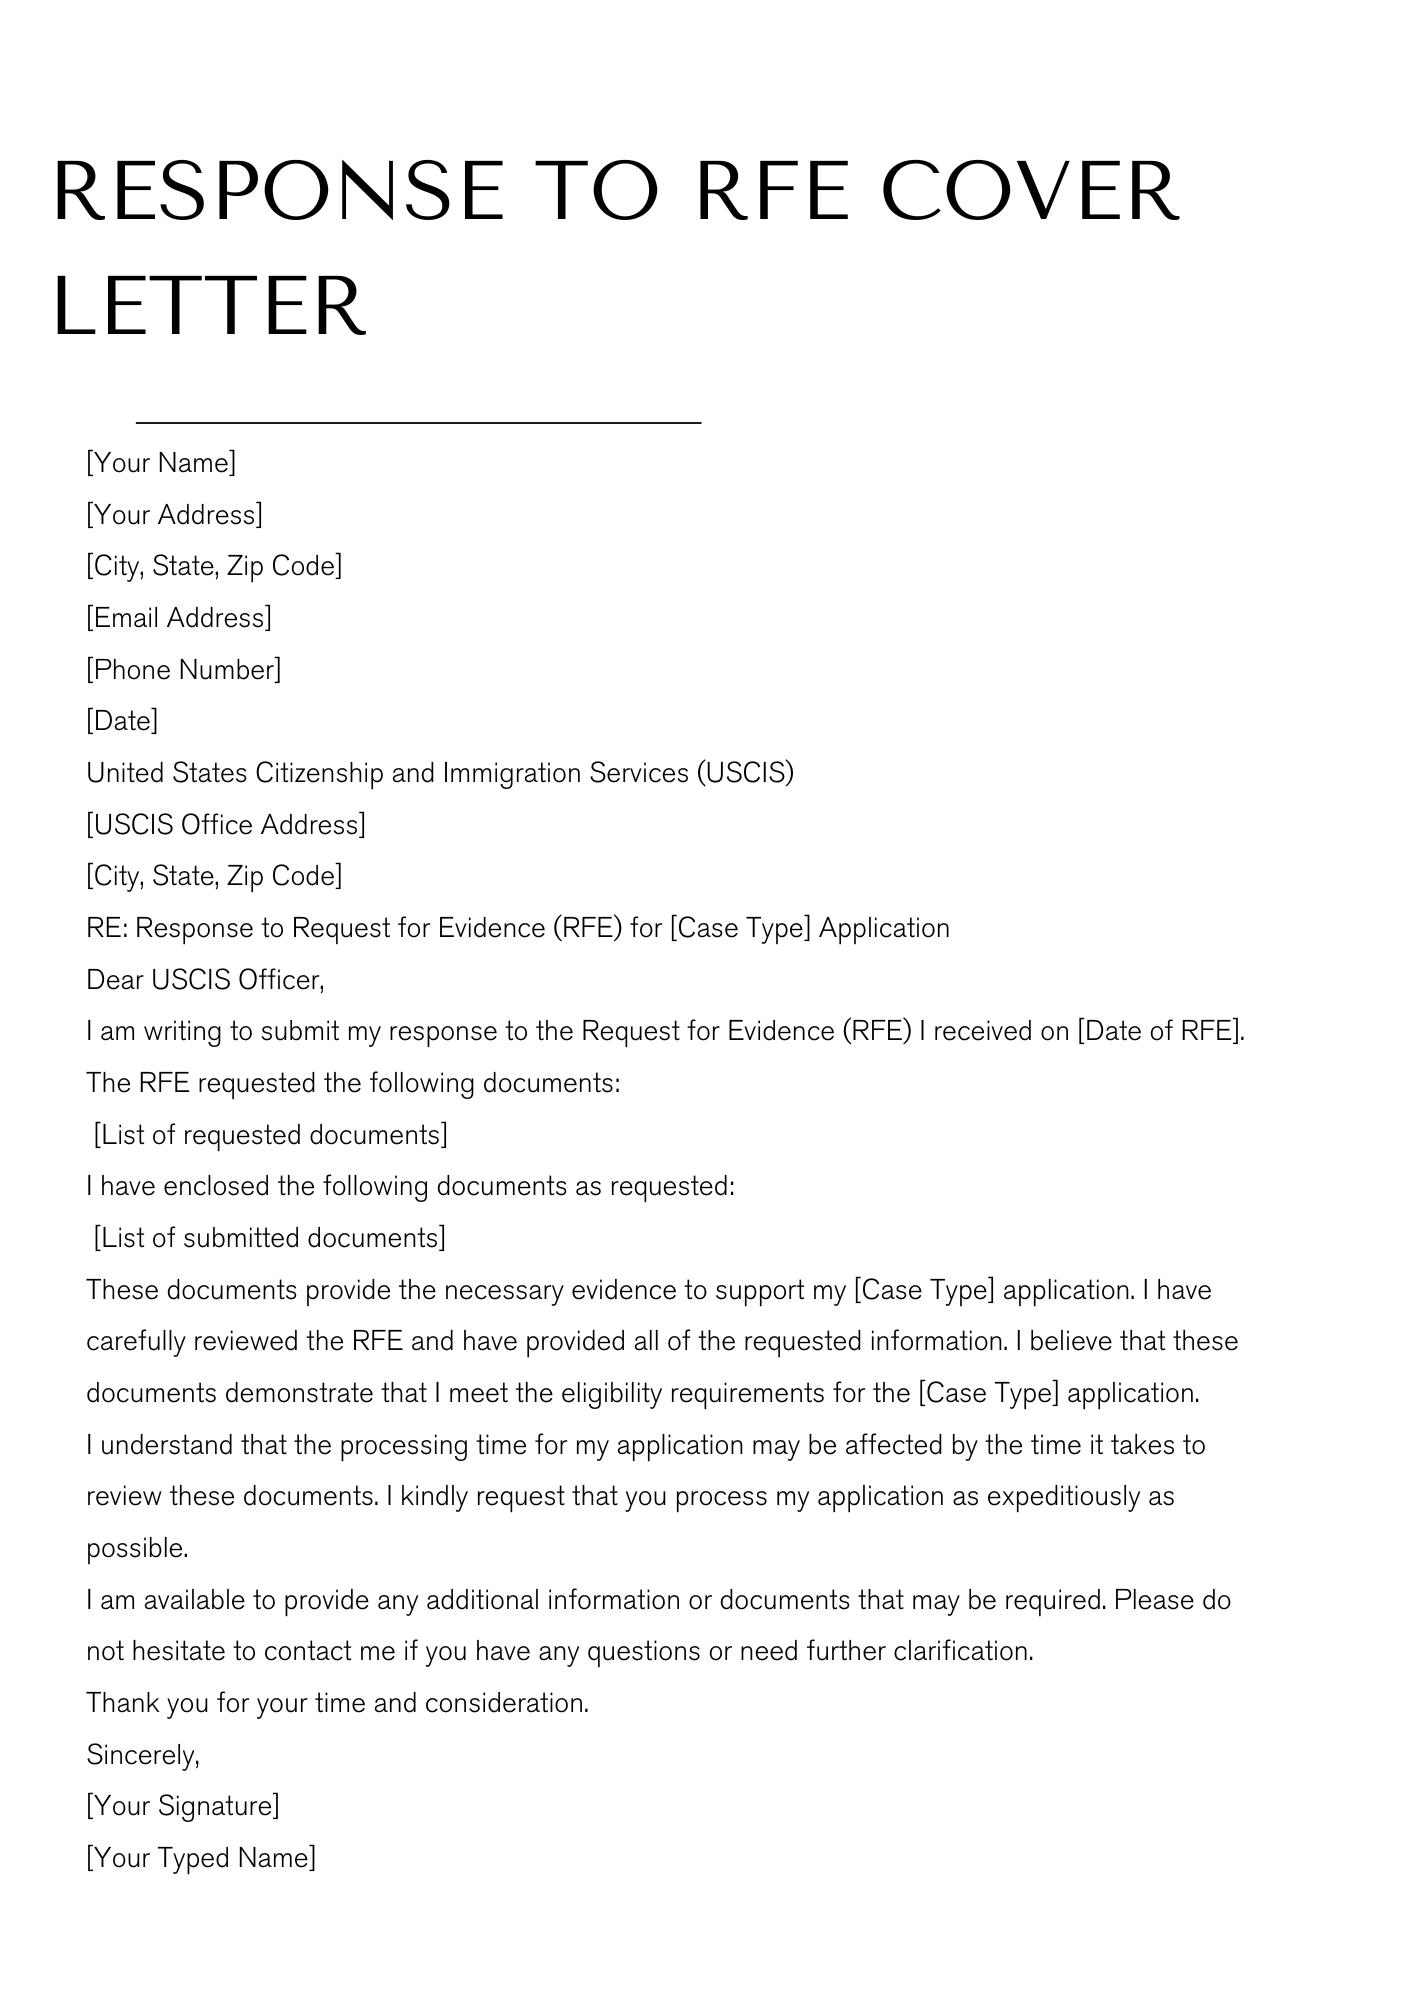 Response to Request for Evidence Cover Letter